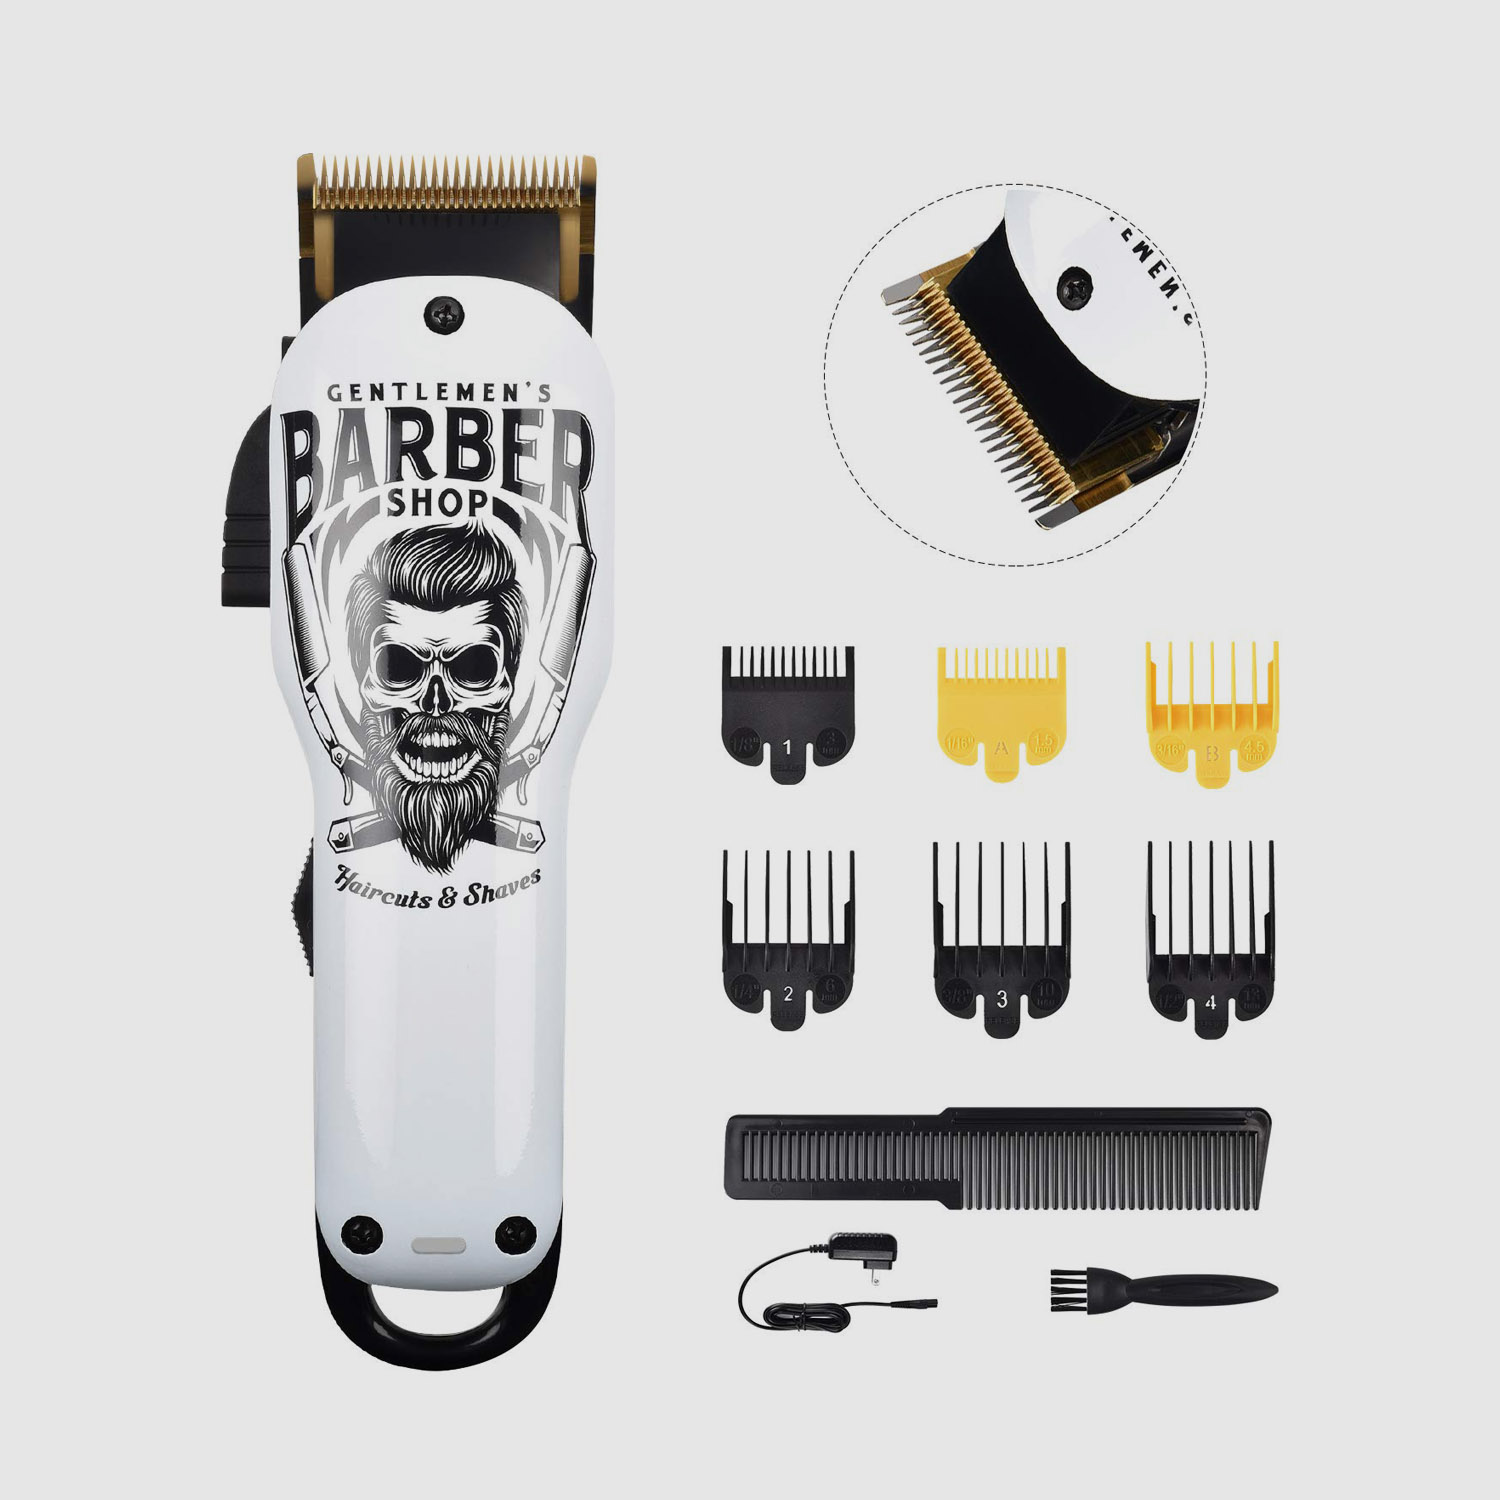 What Makes A Great Set Of Hair Clippers?